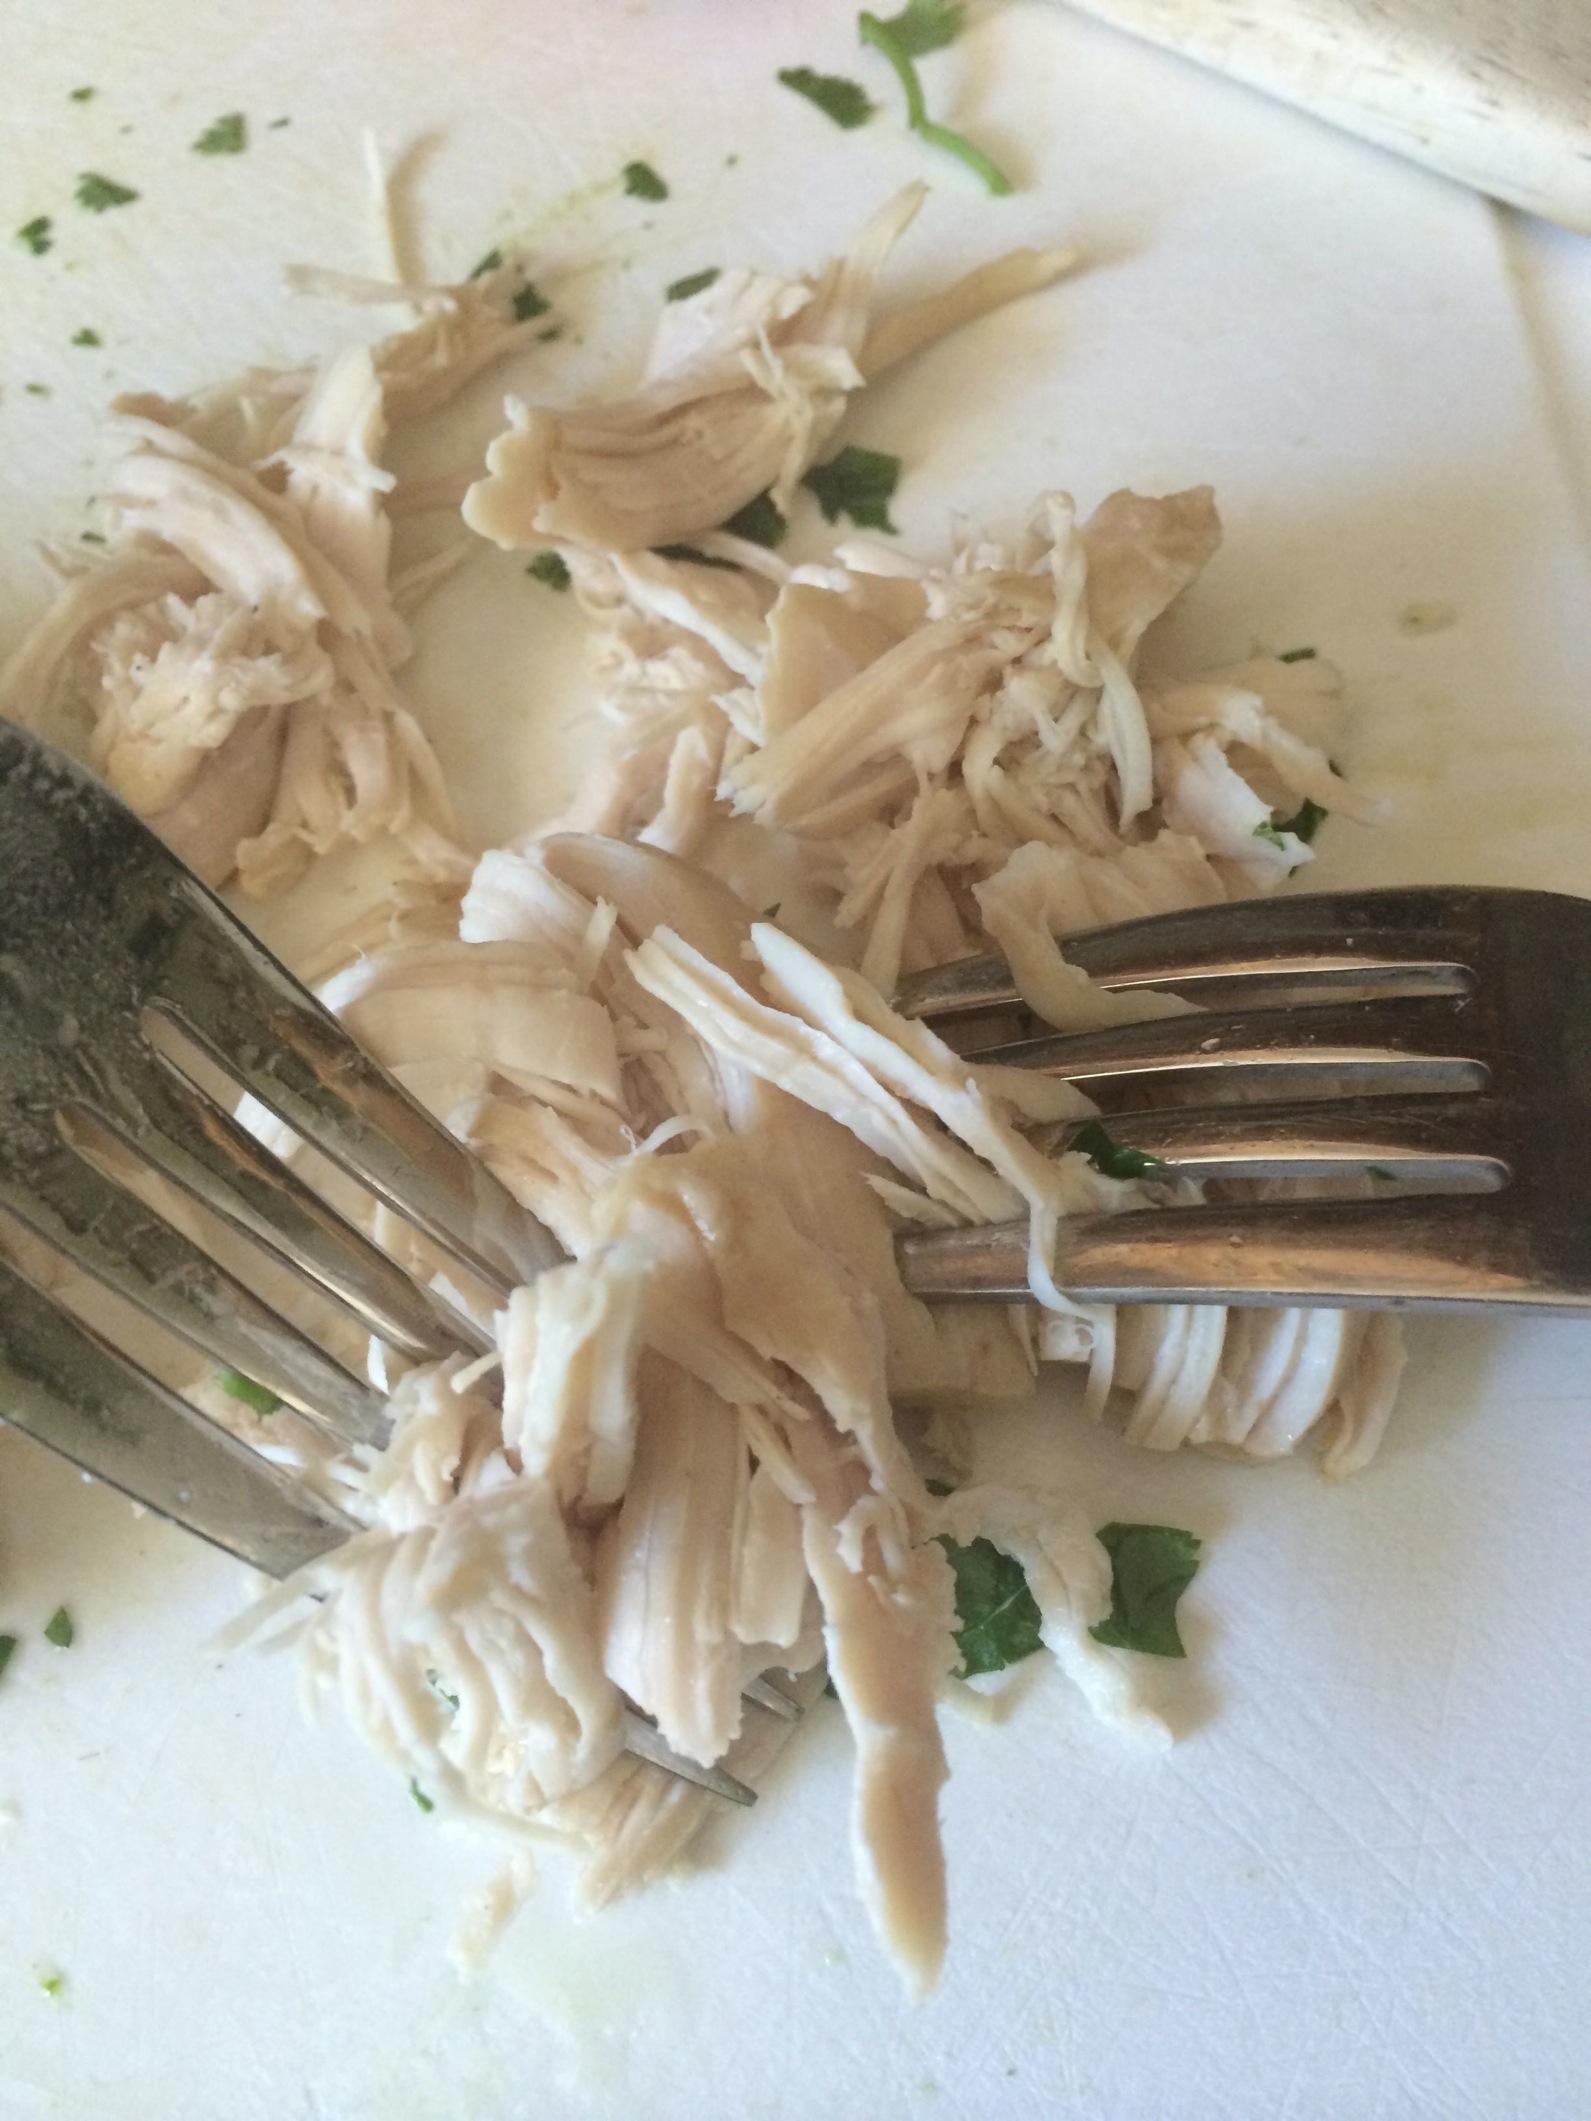 Shredding chicken with two forks on a cutting board.